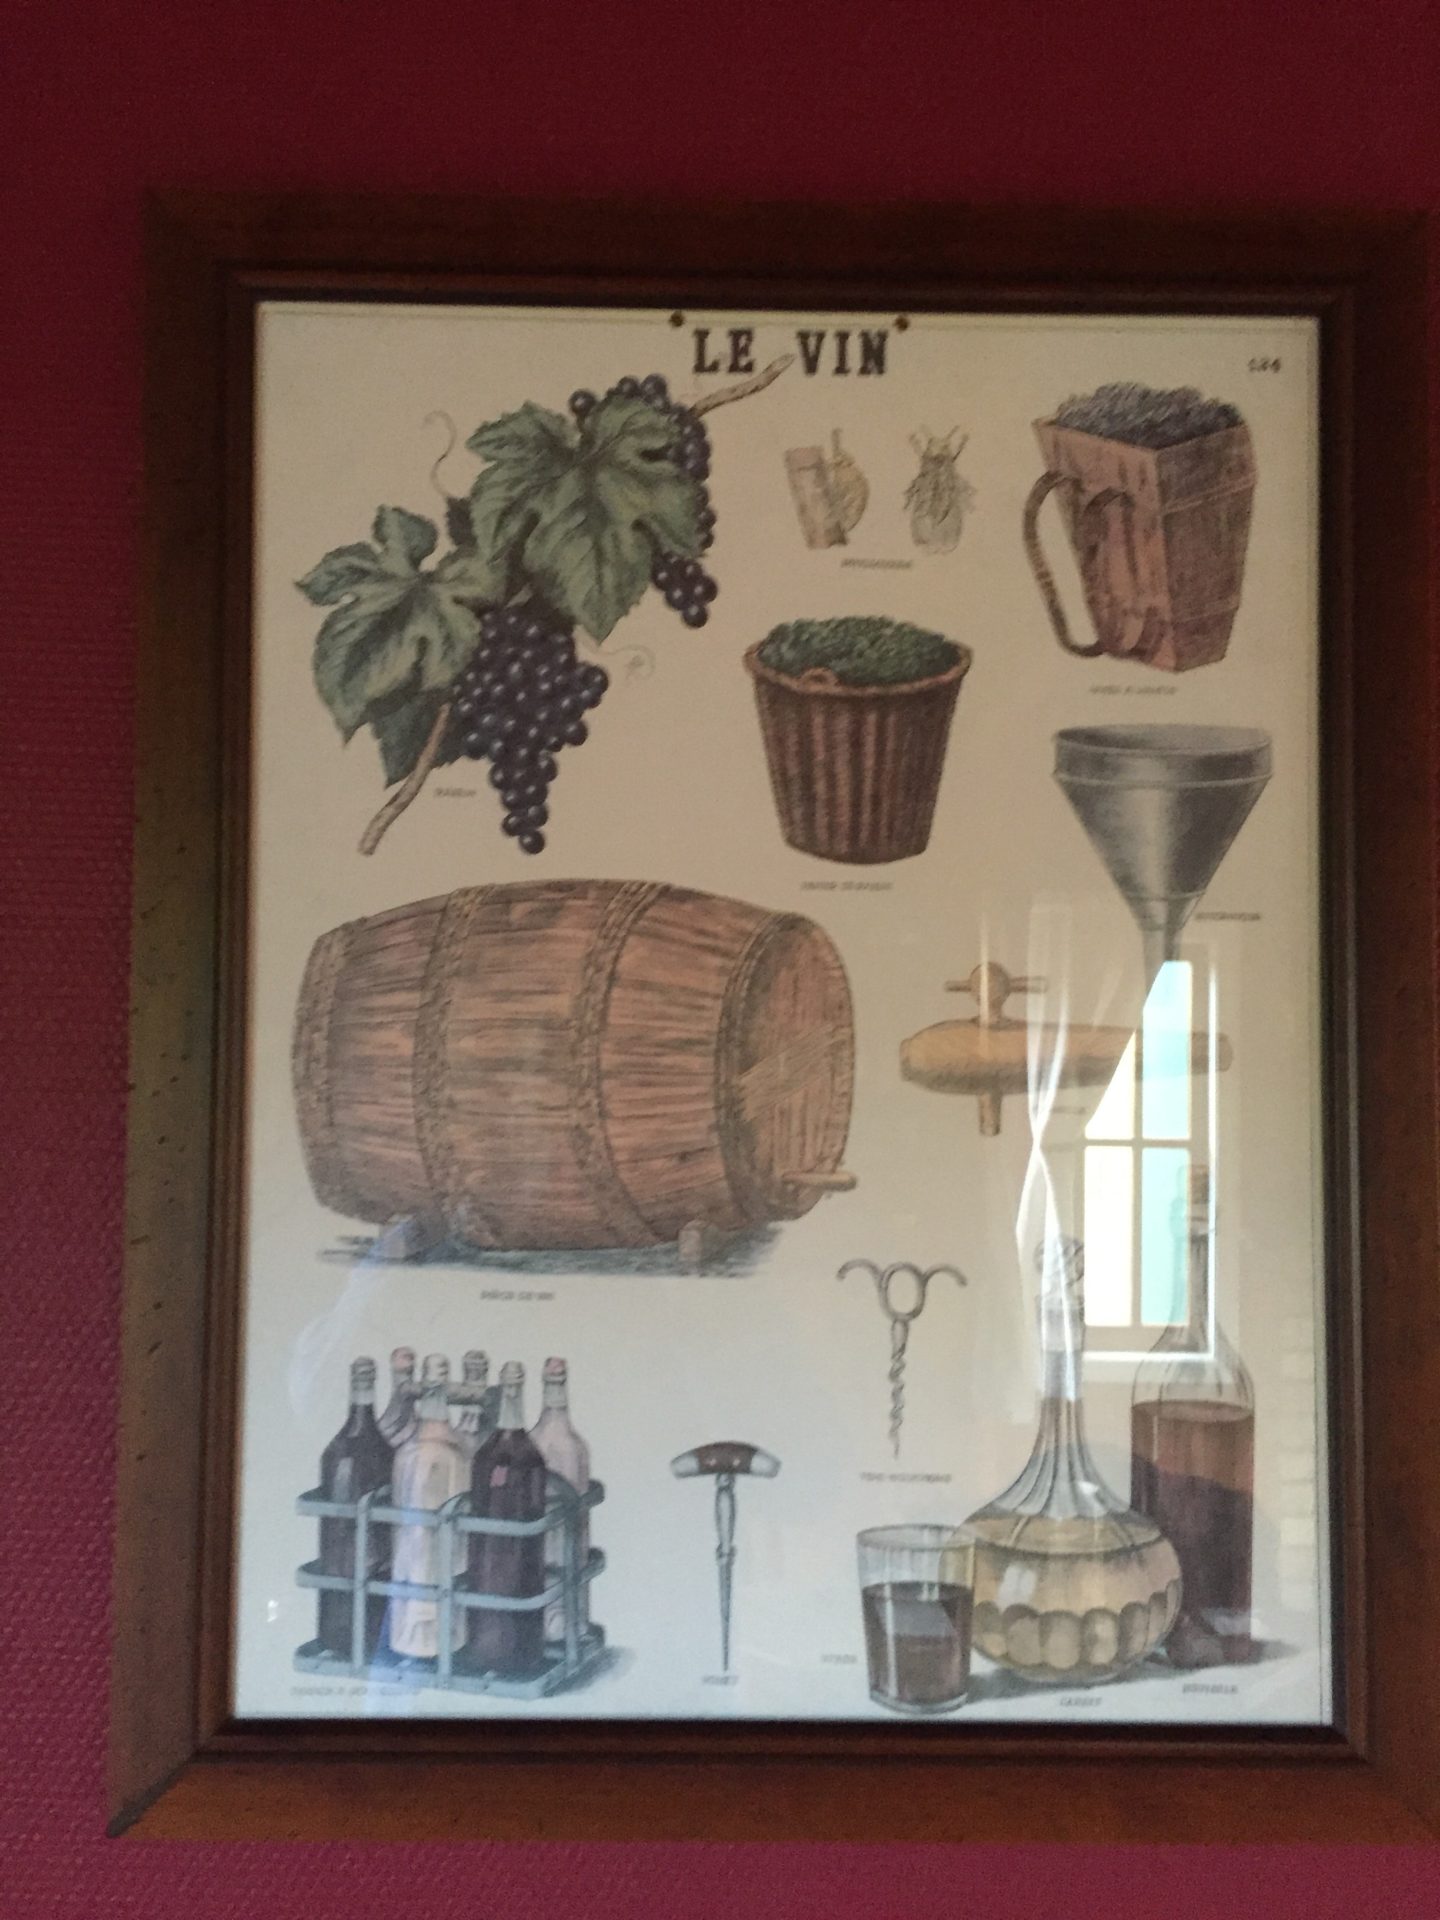 a picture of a wine bottle and wine glasses